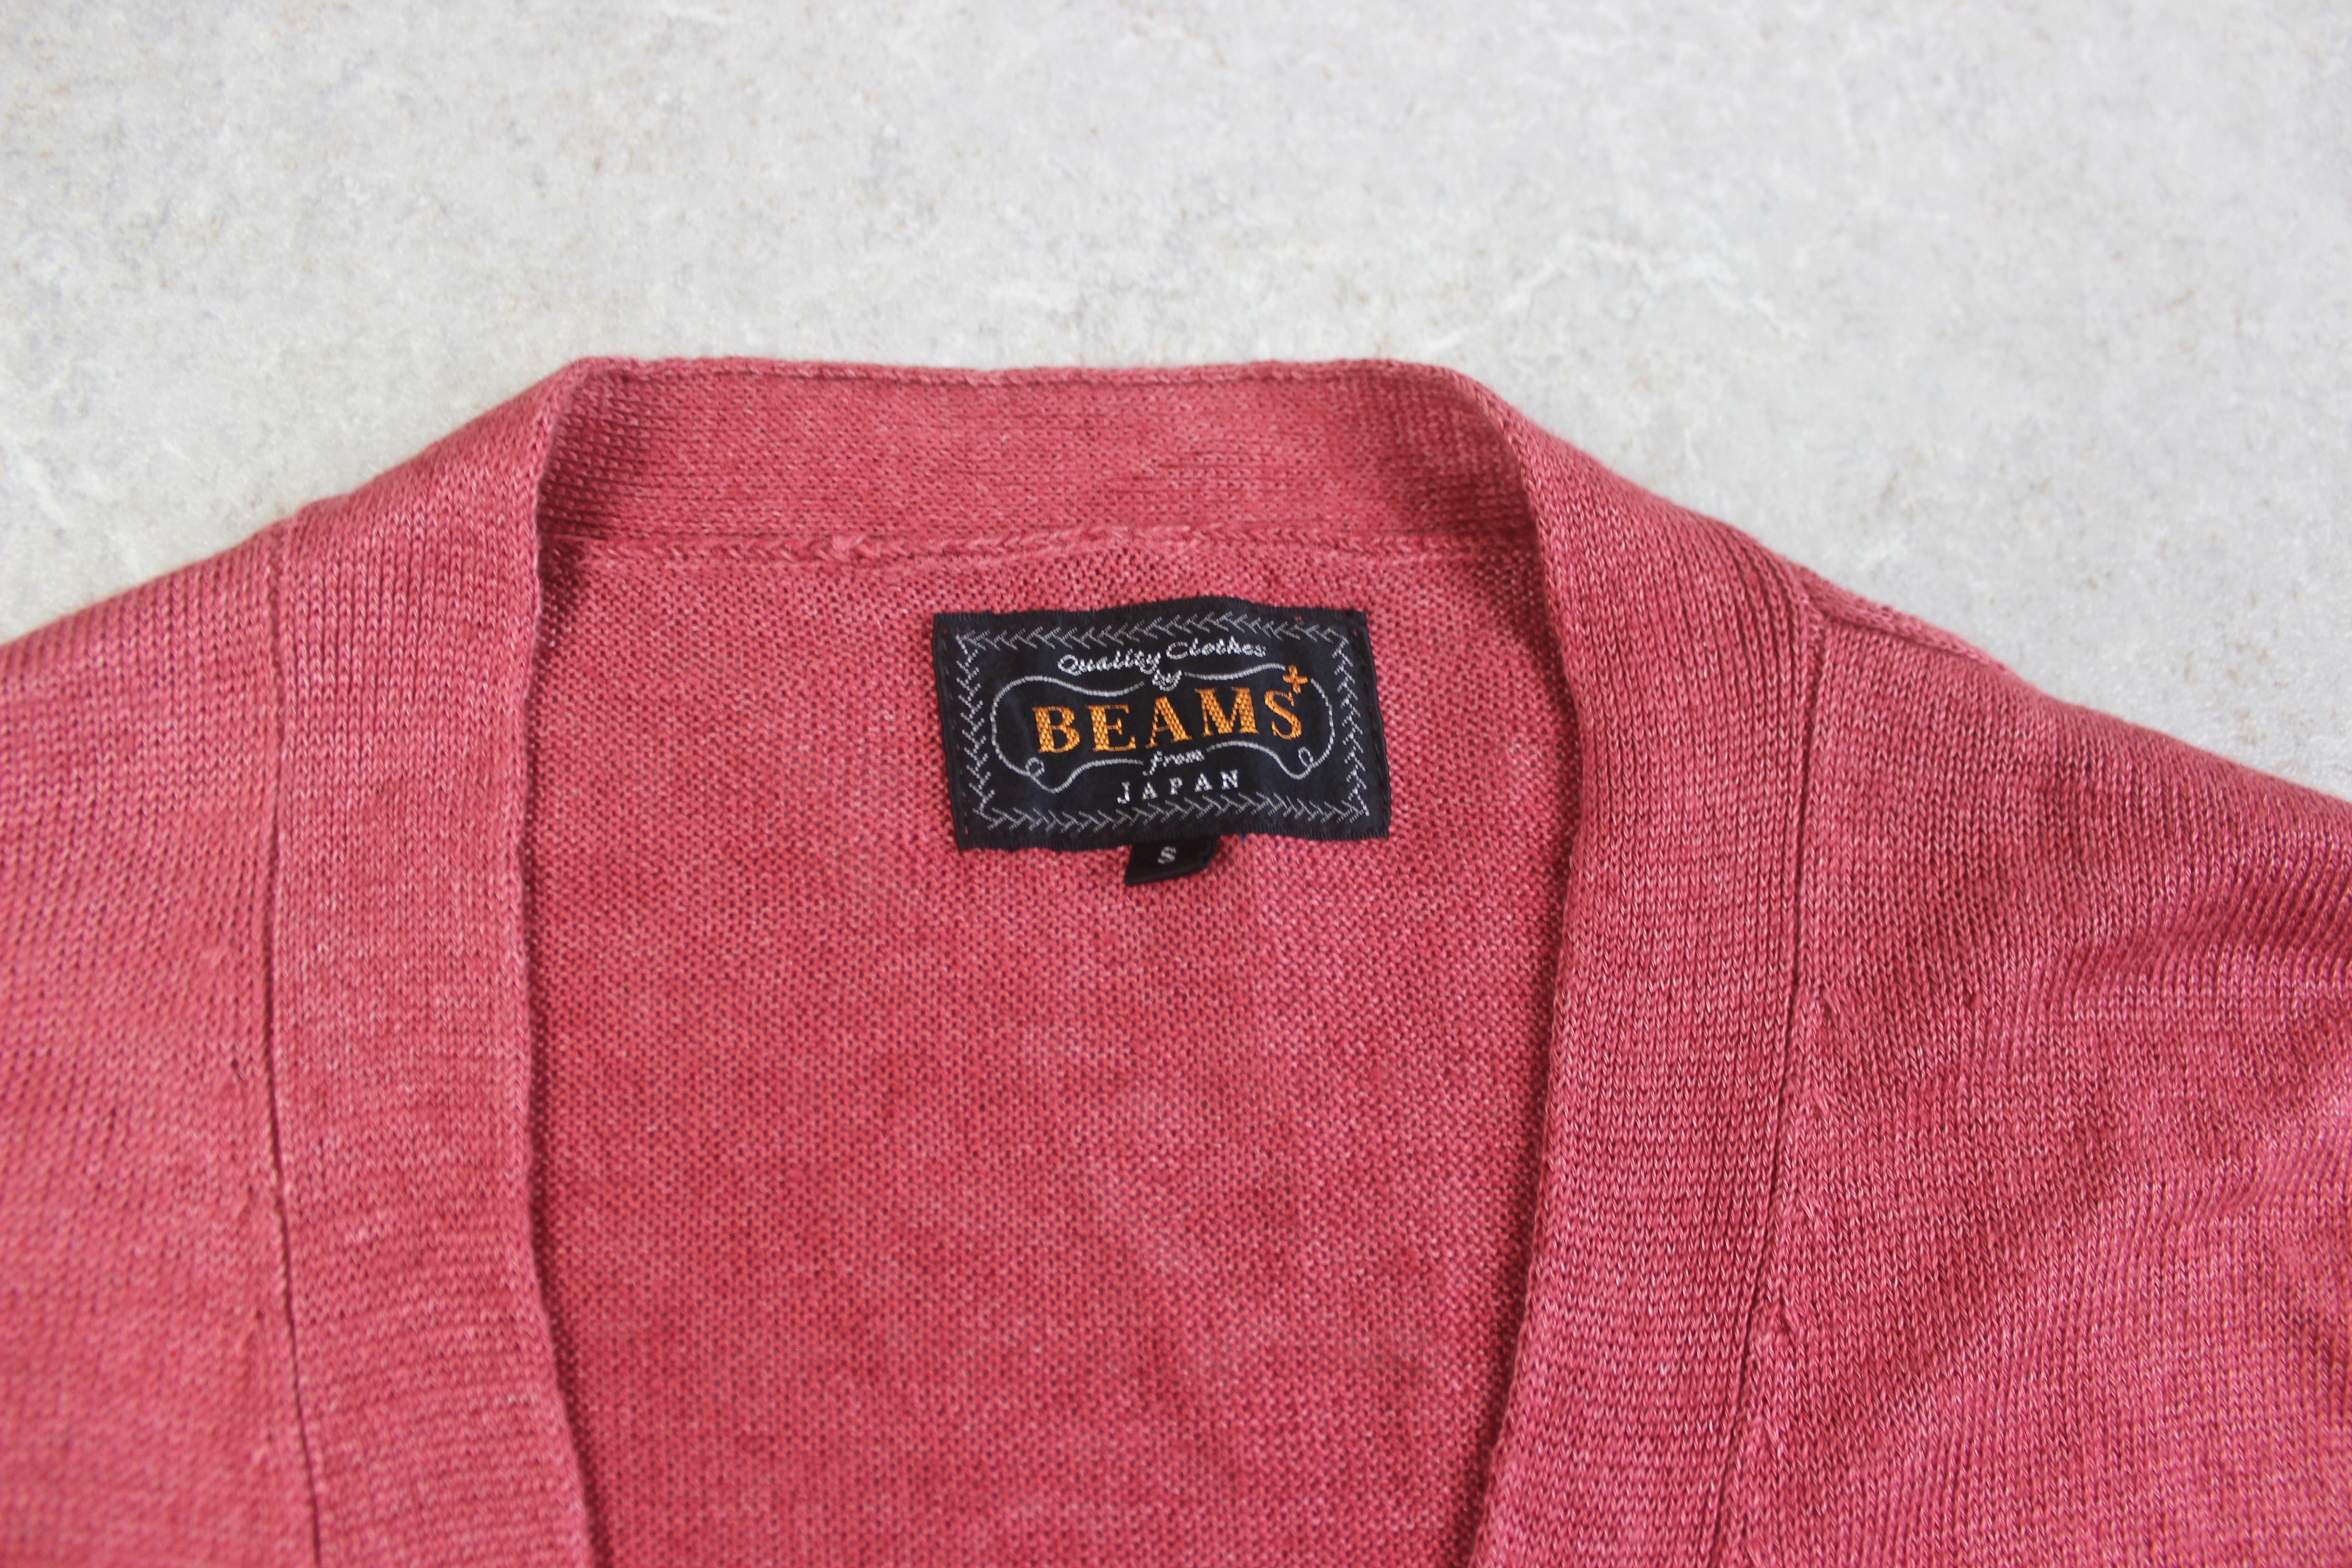 Beams Plus - Linen Knit Cardigan Jumper - Pink/Red - Small